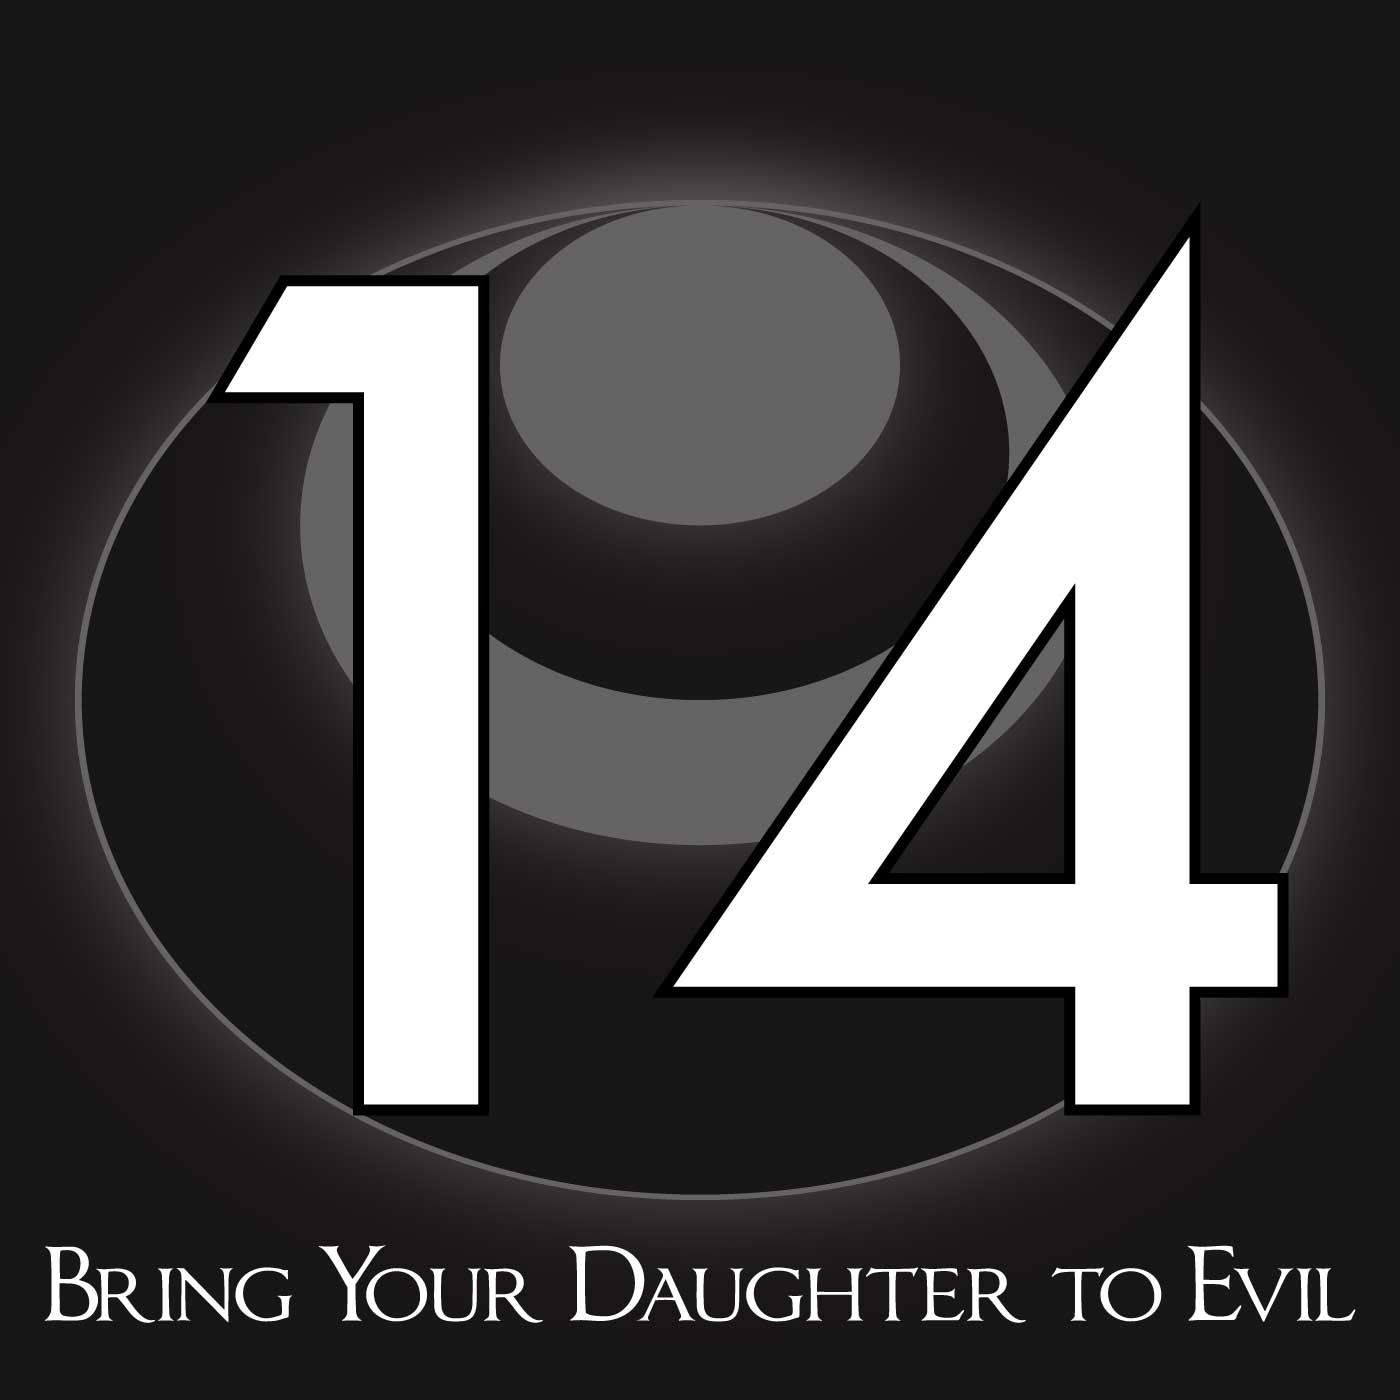 14 – Bring Your Daughter to Evil